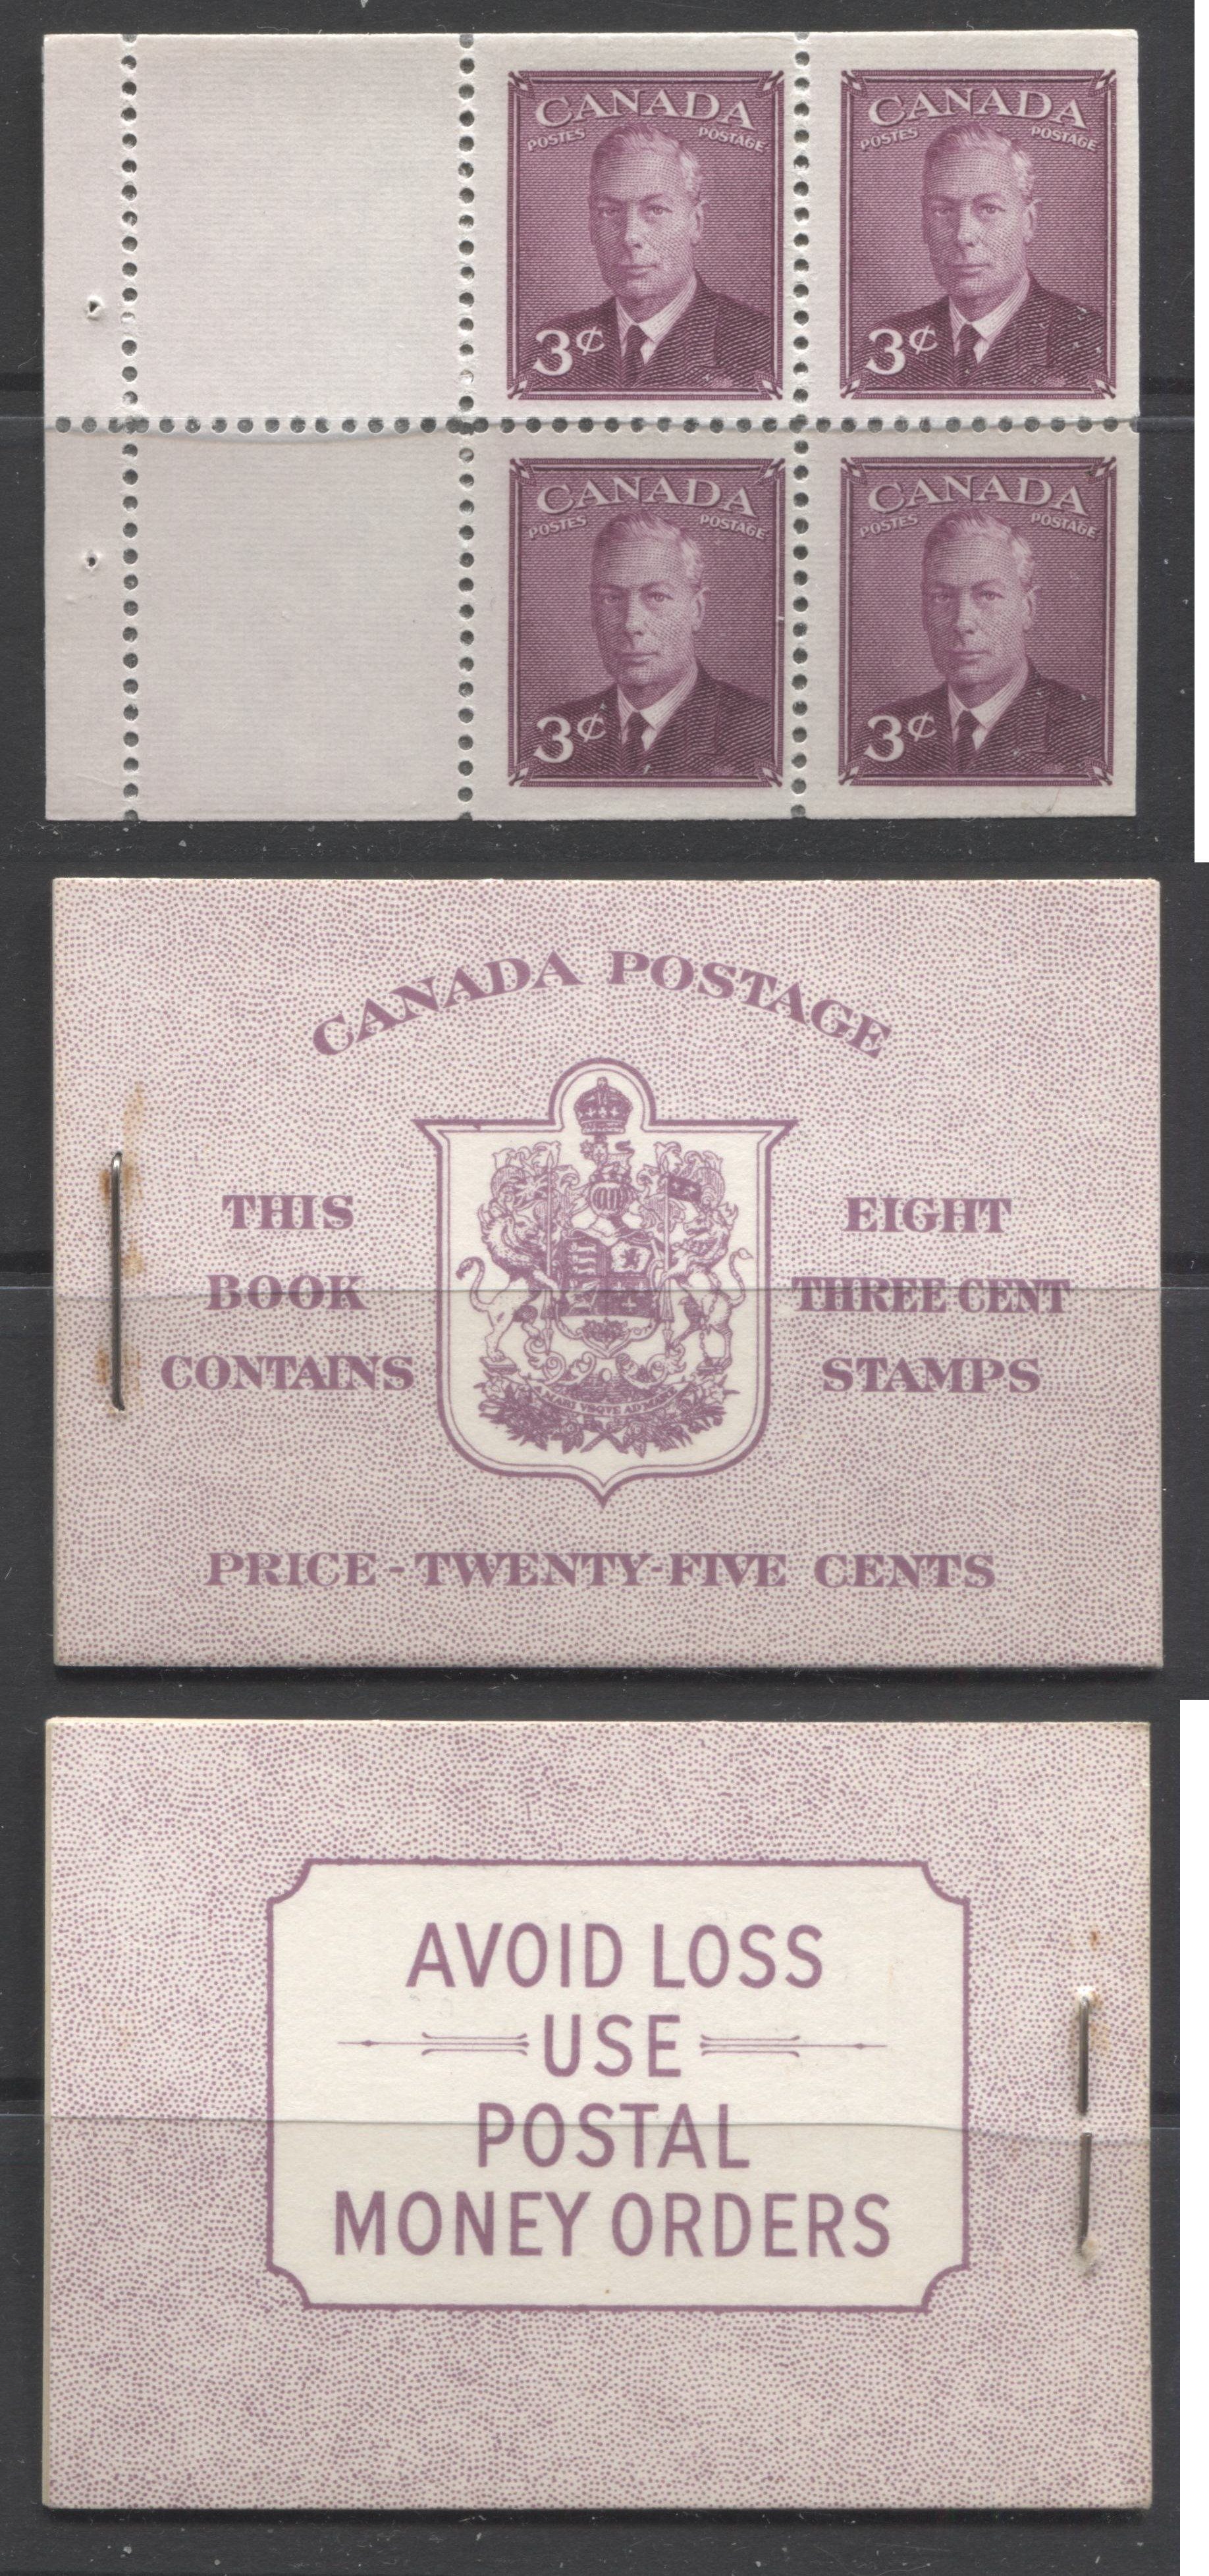 Canada #BK40b 1949-1953 Postes-Postage Issue Complete 25c English, Booklet Containing 2 Panes of the 3c Rose-Purple King George VI, Harris Front Cover Type IIf, Back Cover Eiv, No Rate Page Brixton Chrome 